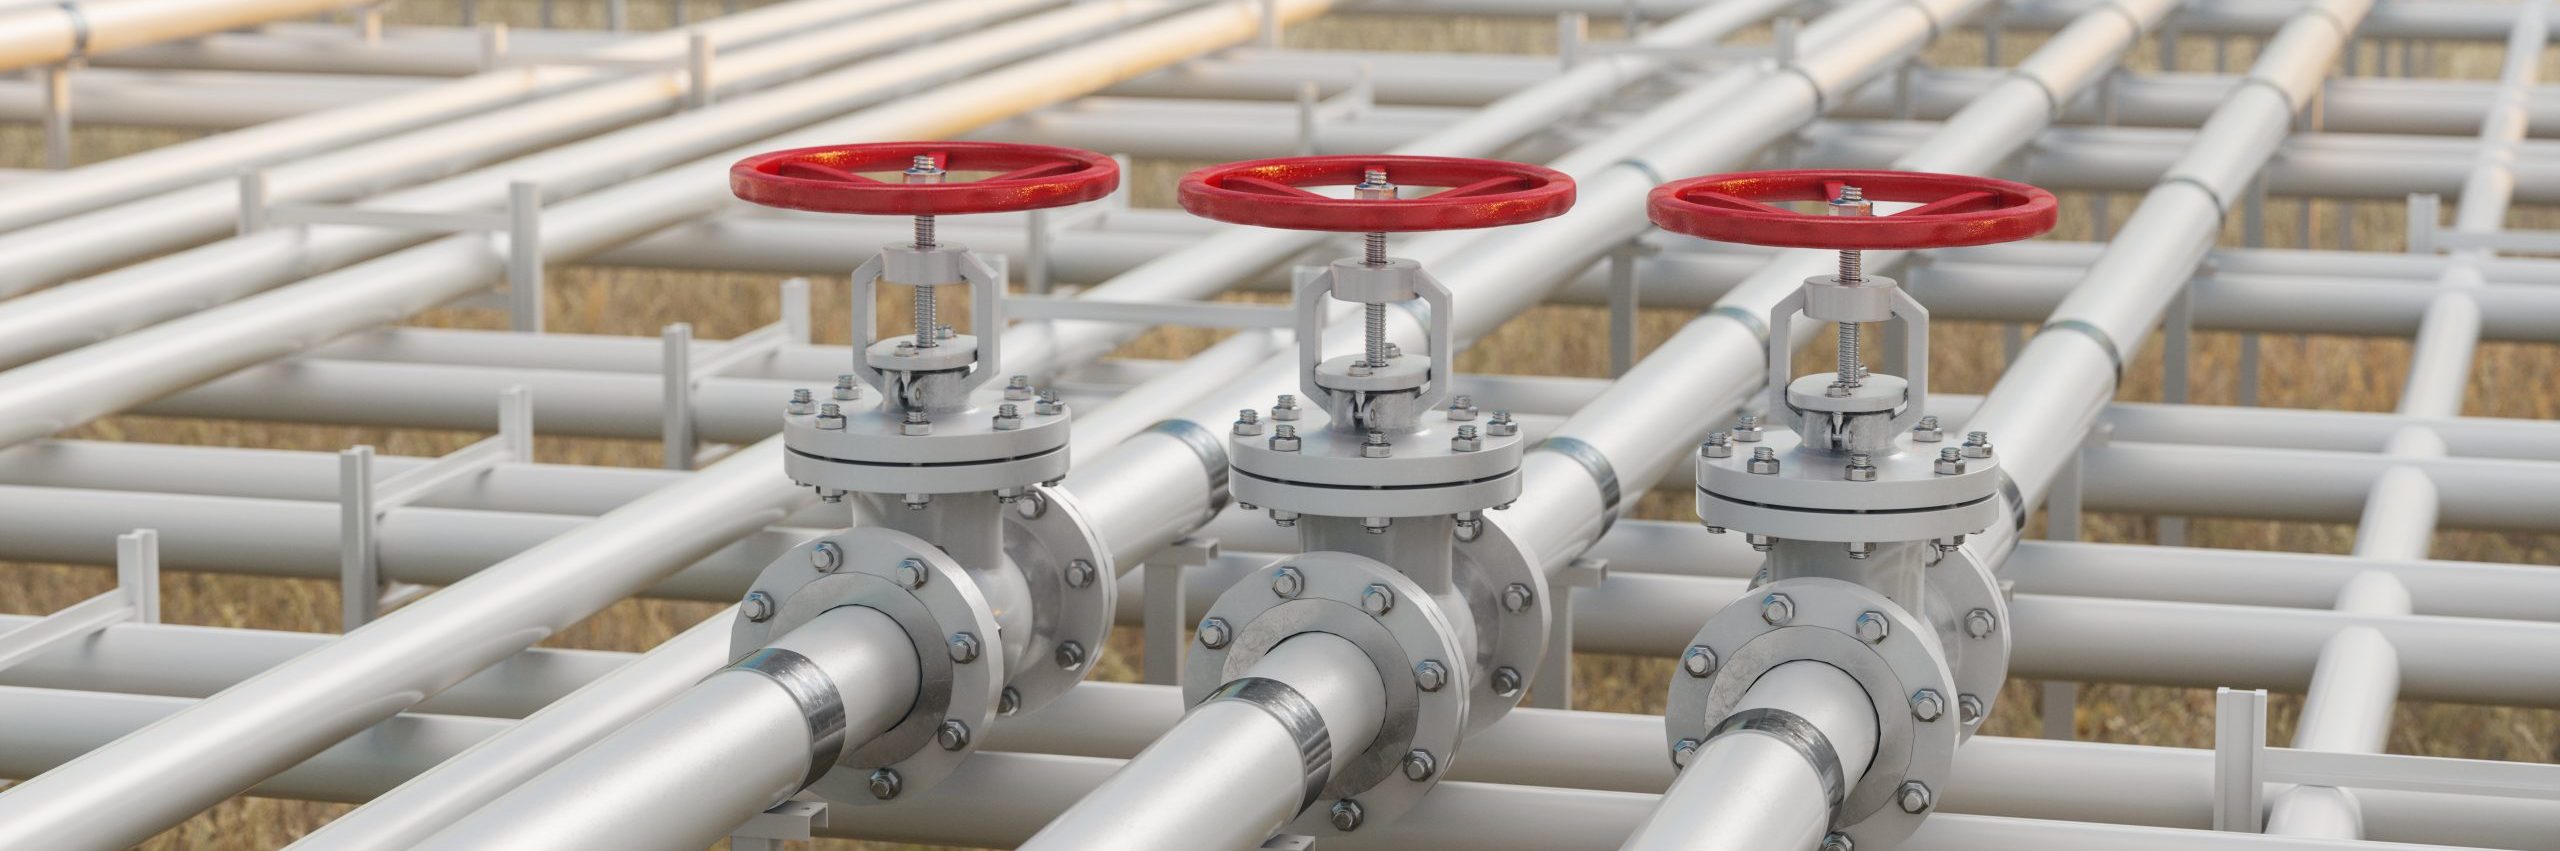 Oil, Gas Or Water Transportation With Pipe Line Valves On Soil With Defocused Background